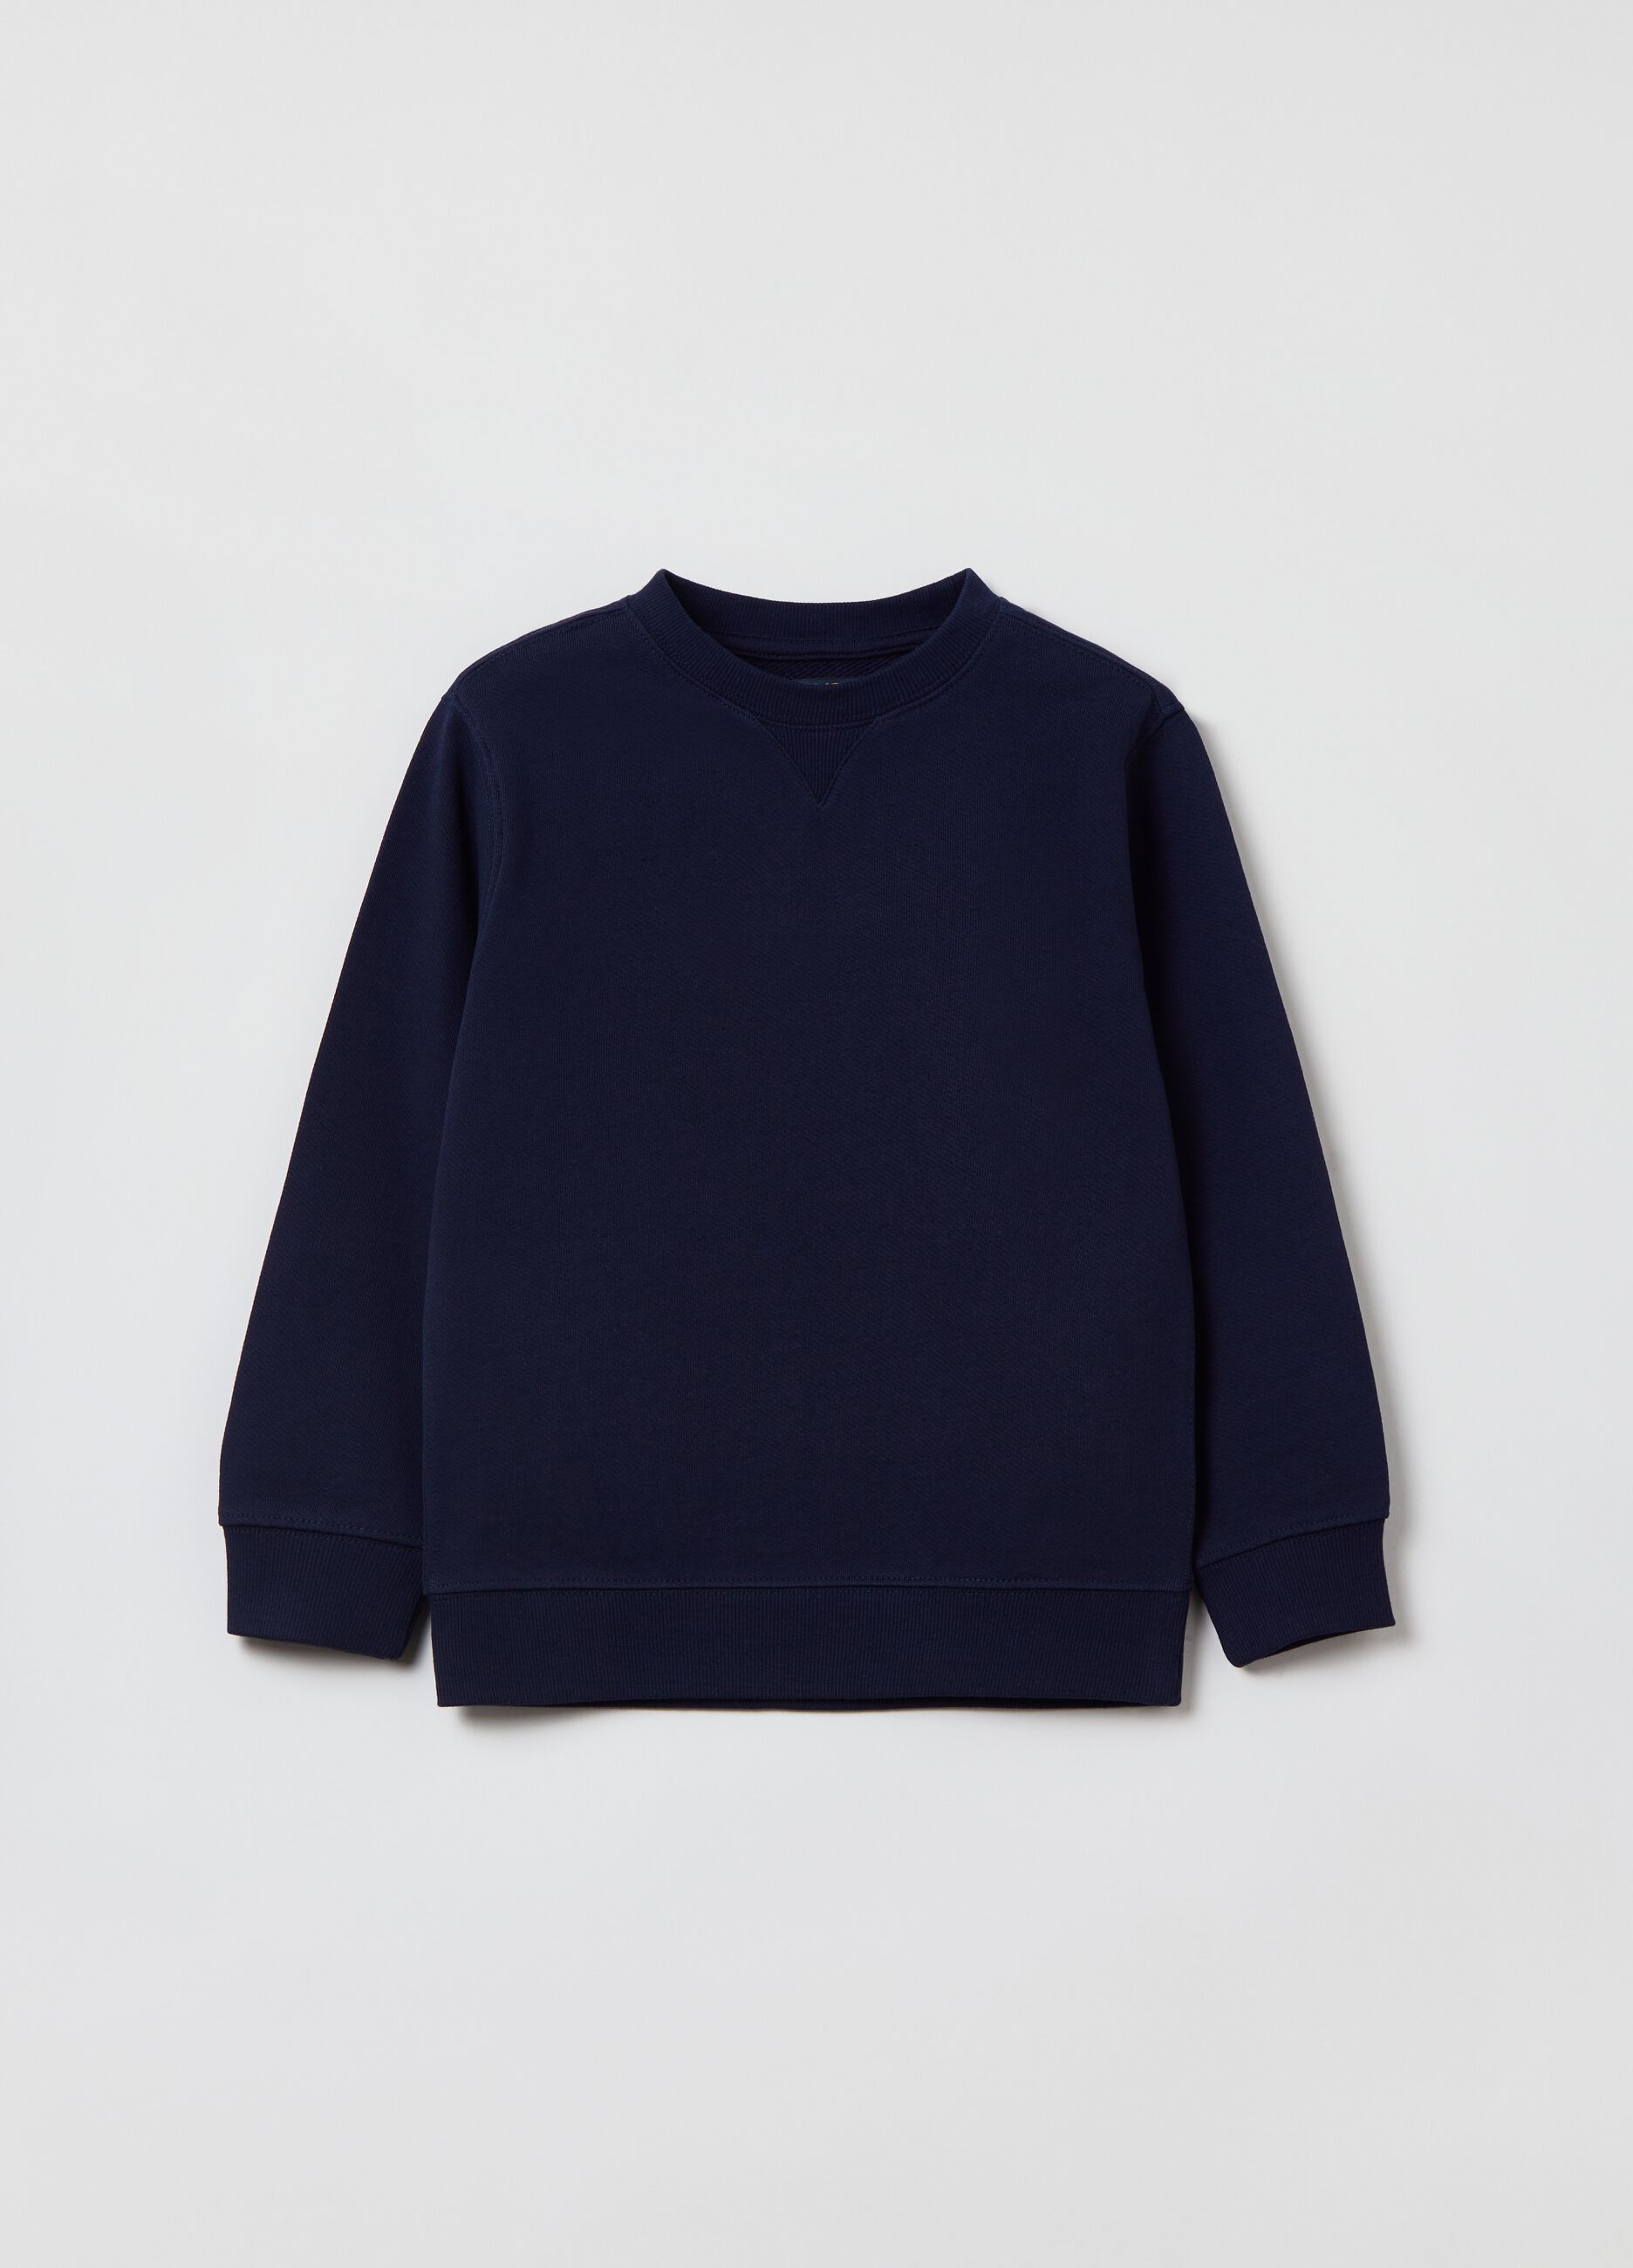 Sweatshirt with round neck and detail